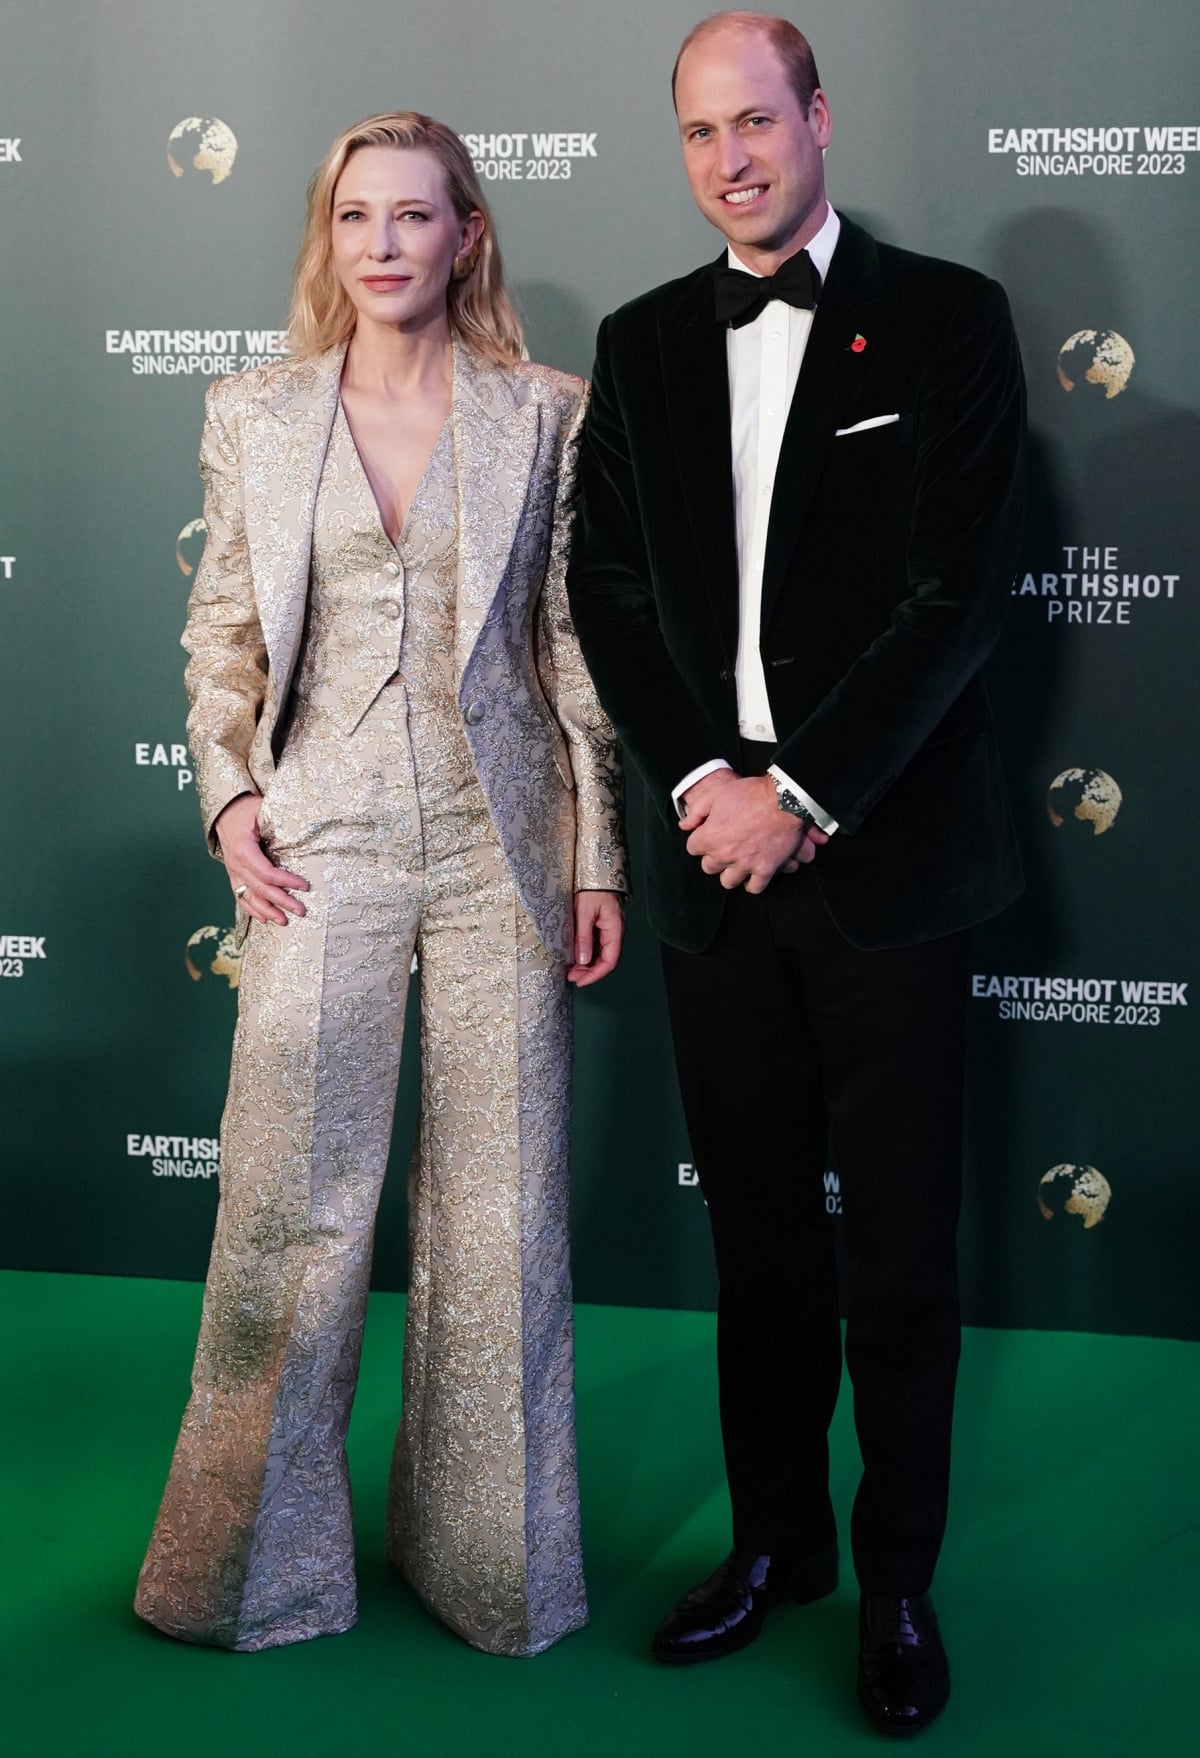 Cate Blanchett posing for photographs on the green carpet with Prince William in a classic black-and-white tuxedo